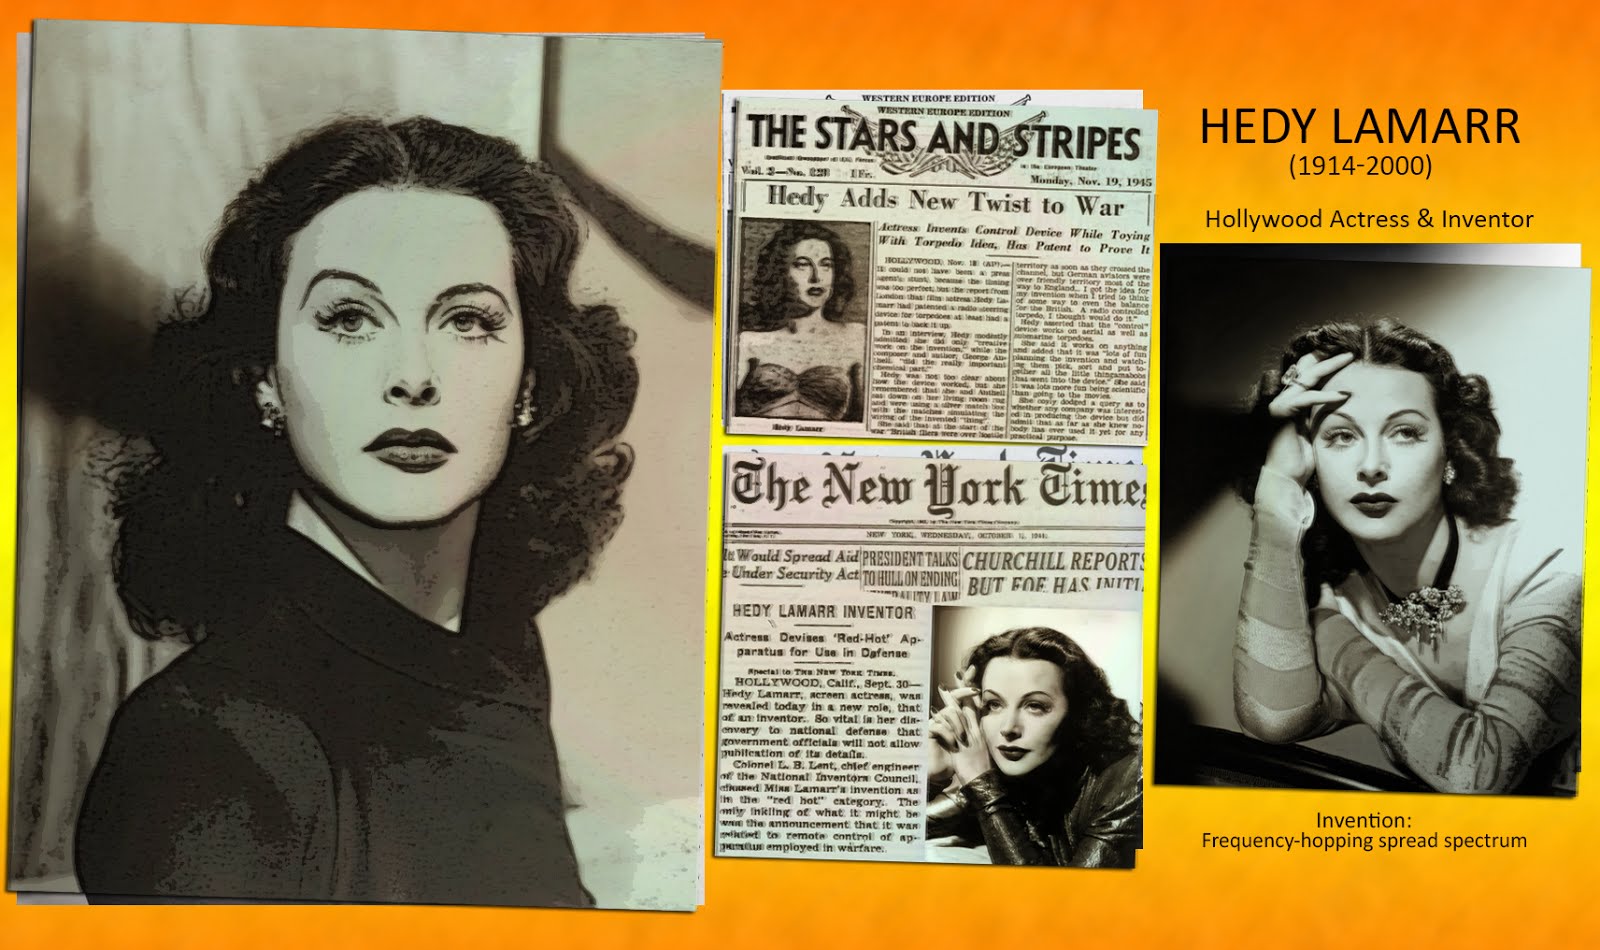 Hedy Lamarr - Hollywood Actress and Inventor.